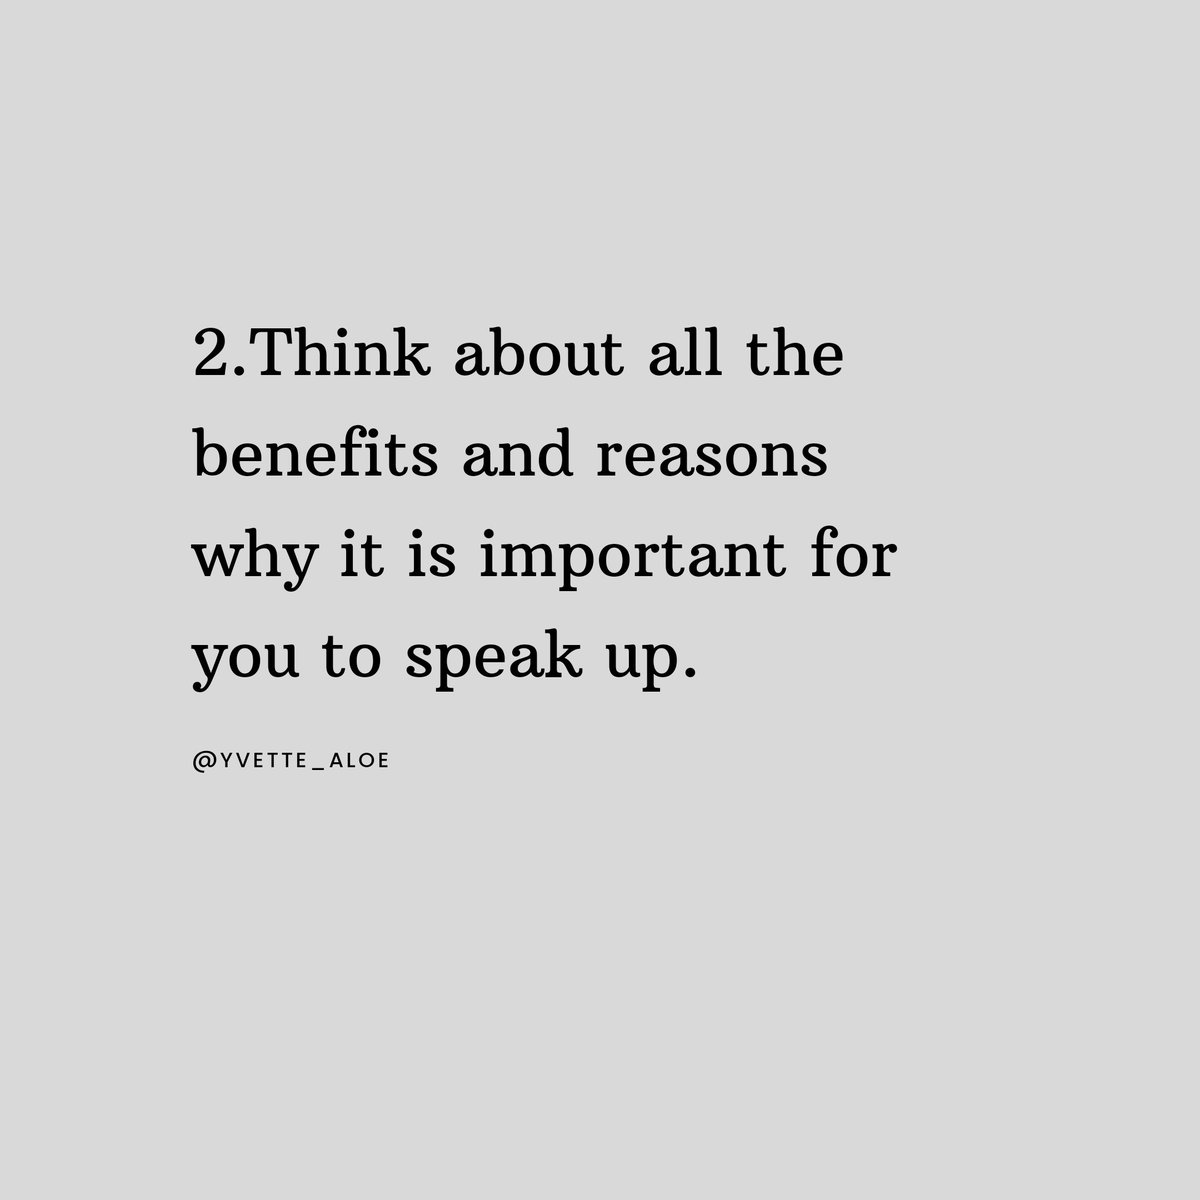 Think about all the benefits and reasons why it is important for you to speak up.